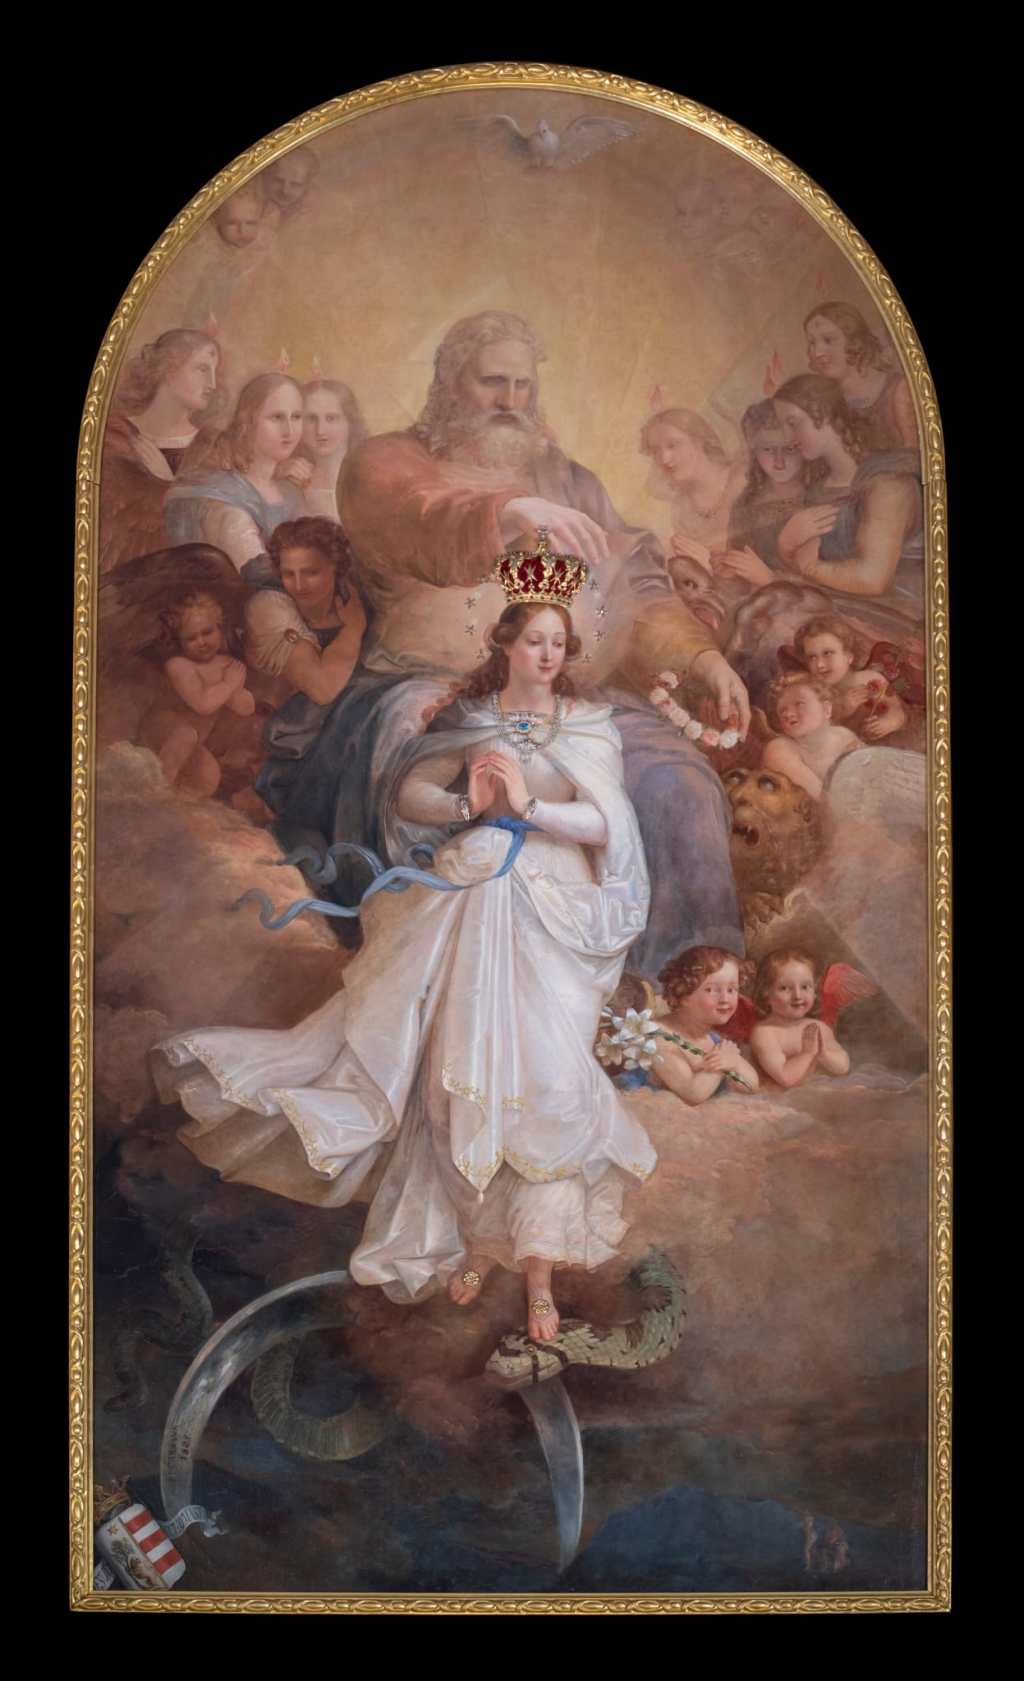 Immaculate Conception painting in Gozo